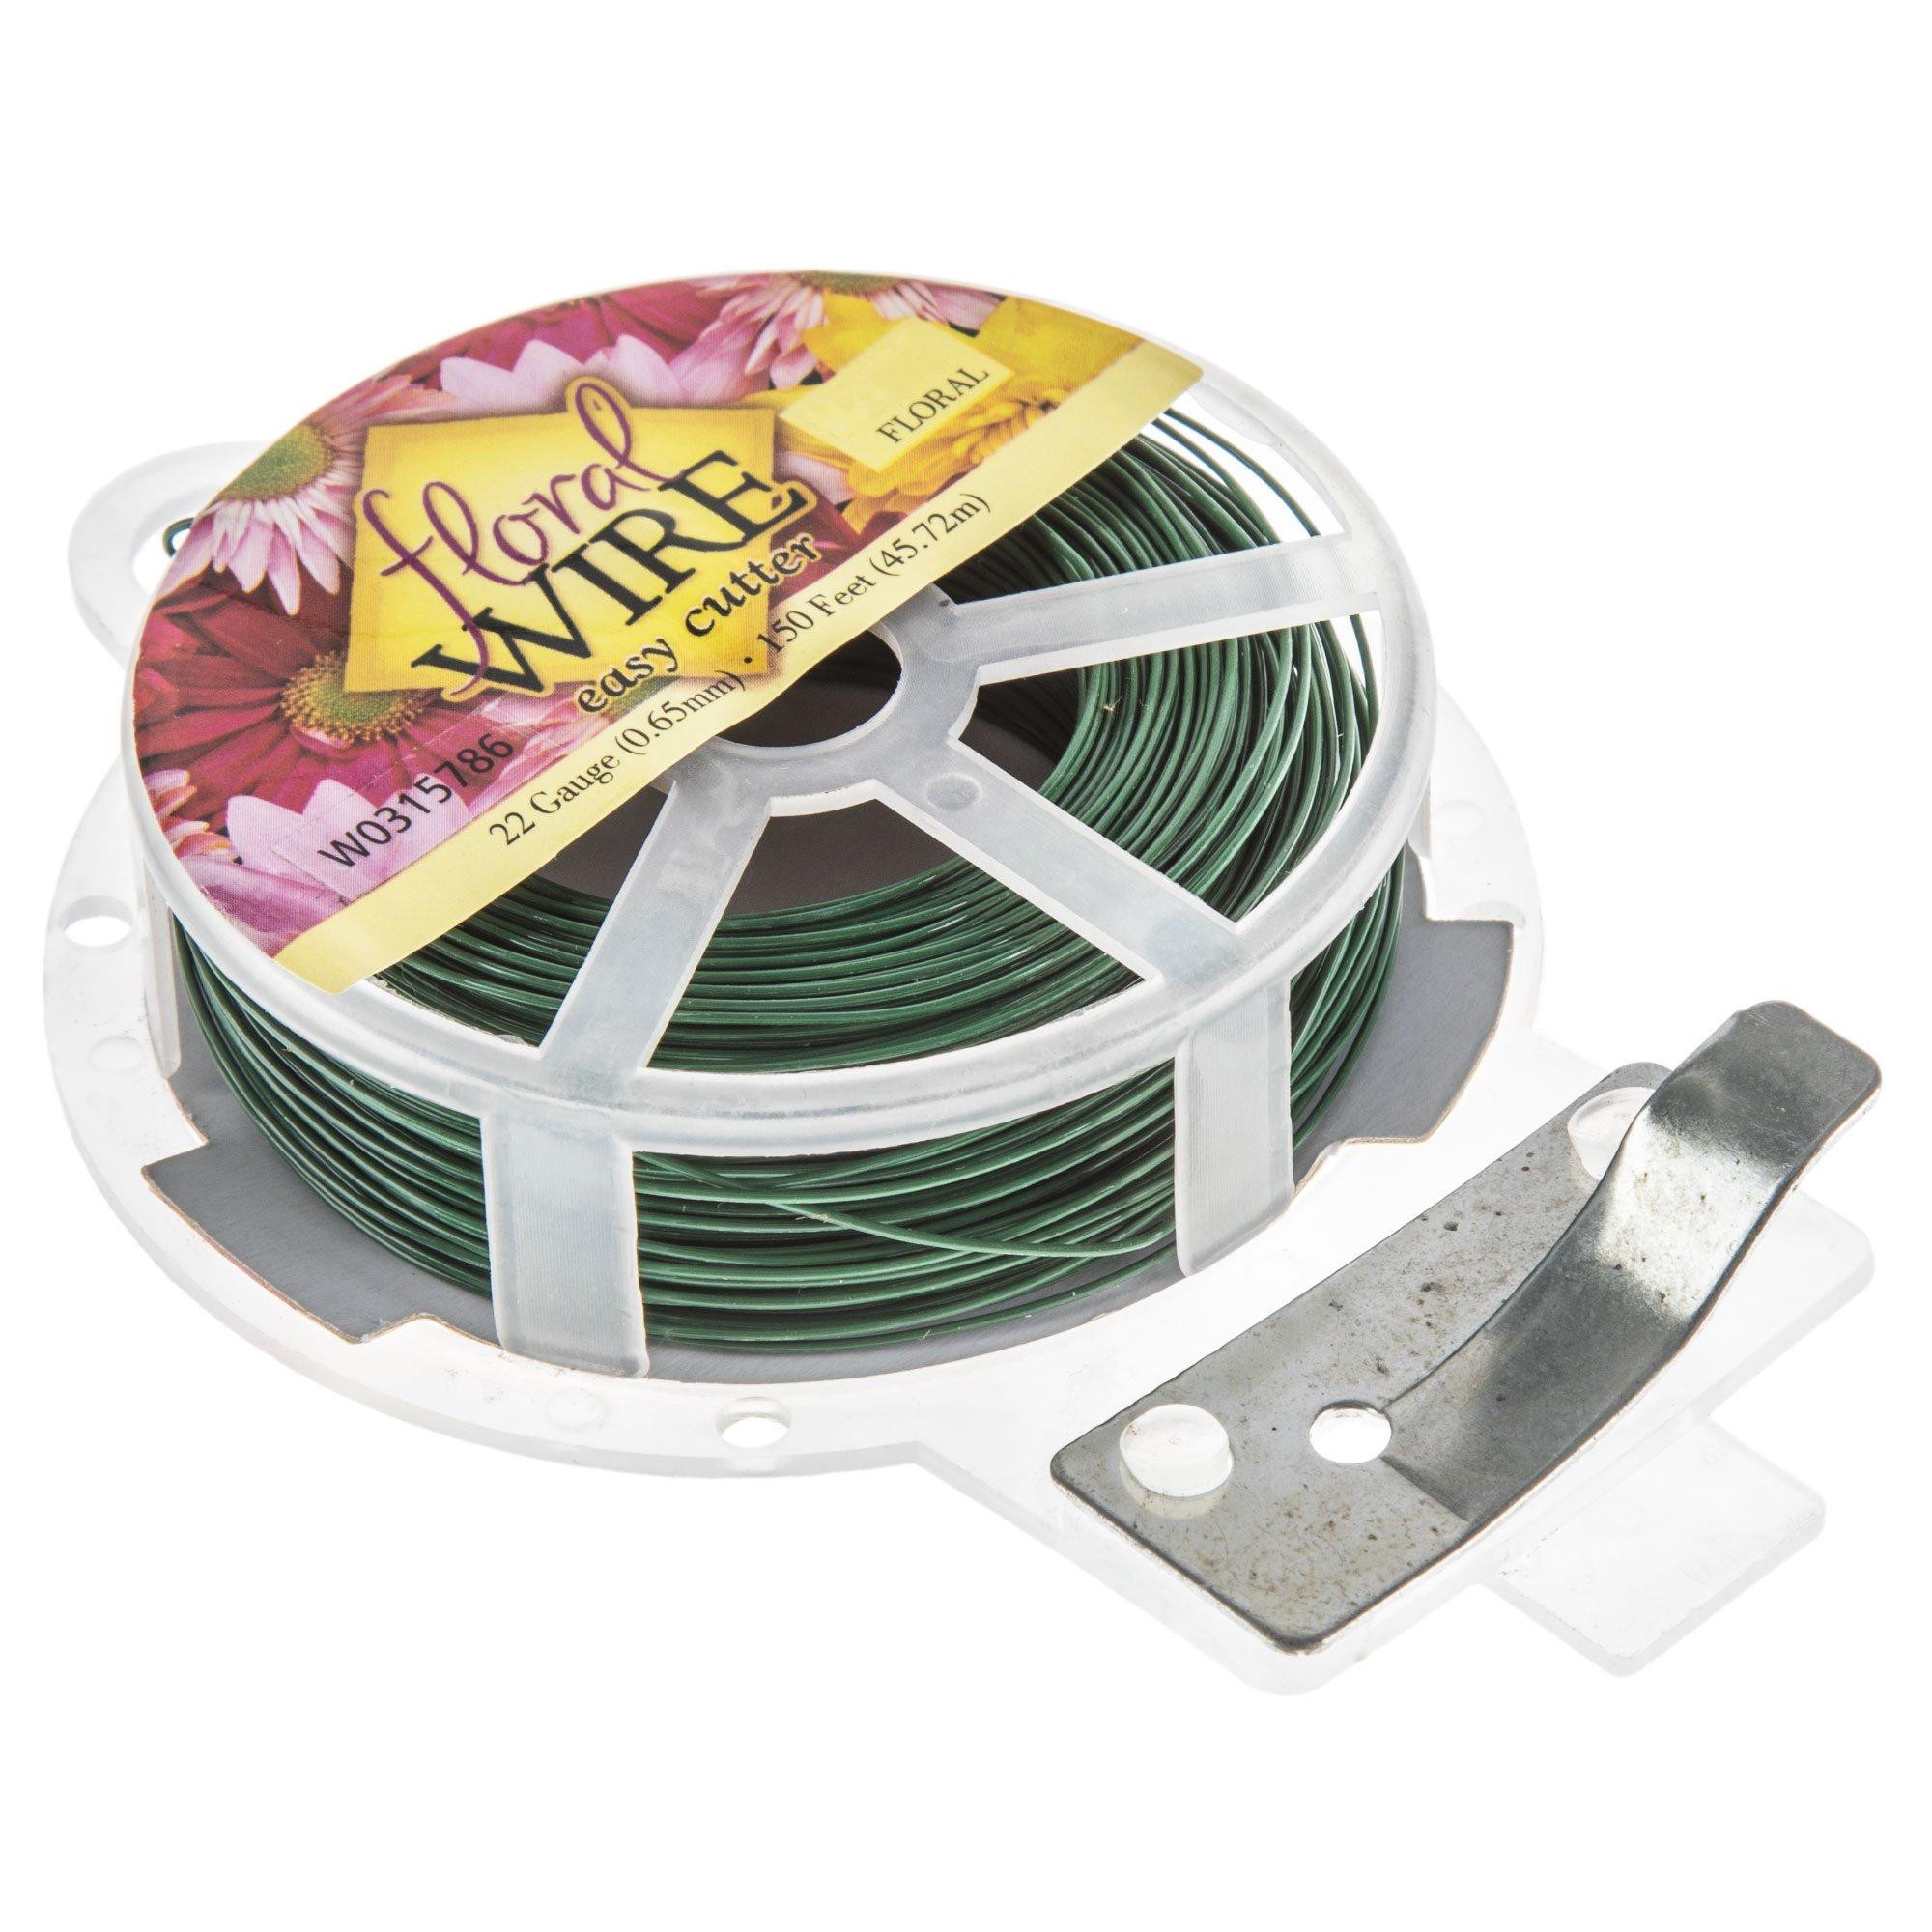 Phinus Floral Wire, 110 Yards 22 Gauge Green Florist Wire, Flexible Green Wire Paddle Wire for Crafts, Christmas Wreaths Tree, Garland and Floral